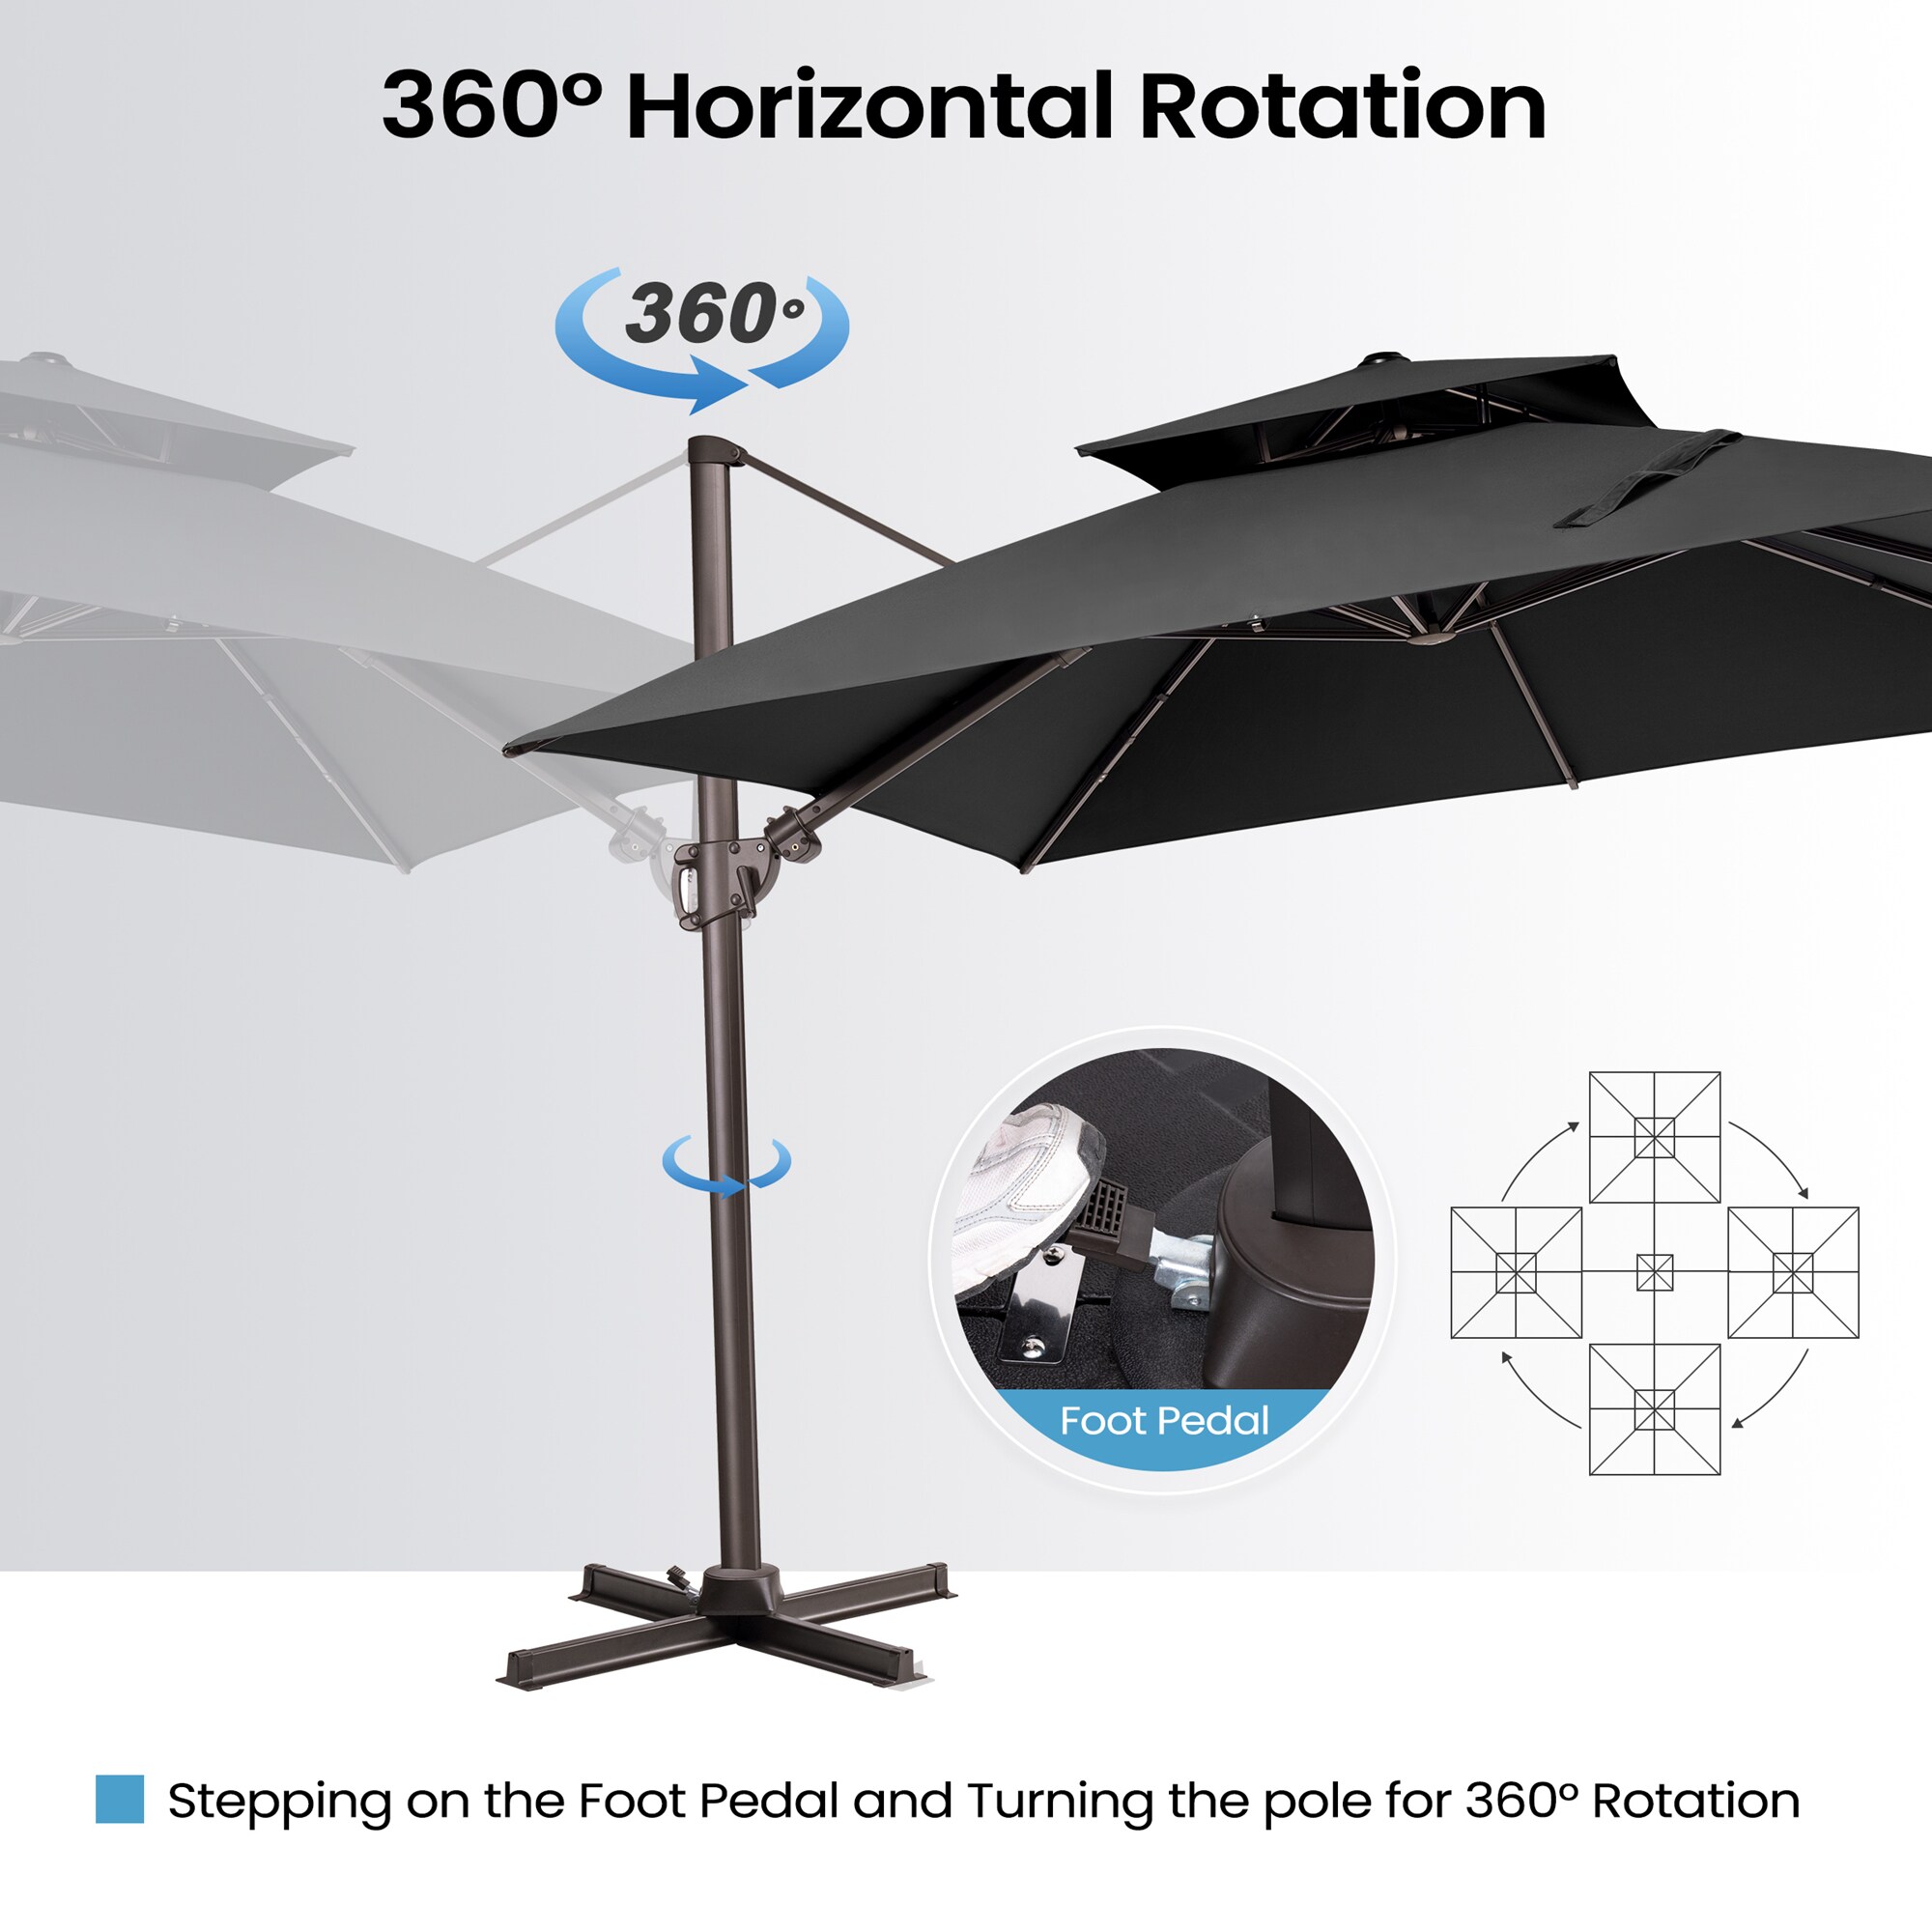 JEAREY 10FT Offset Cantilever Patio Umbrellas Heavy Duty Outdoor Hanging Umbrellas Large Round Sun Umbrella with 360° Rotation and Crank System & Cross Base for Backyard Pool Market Balcony Deck 